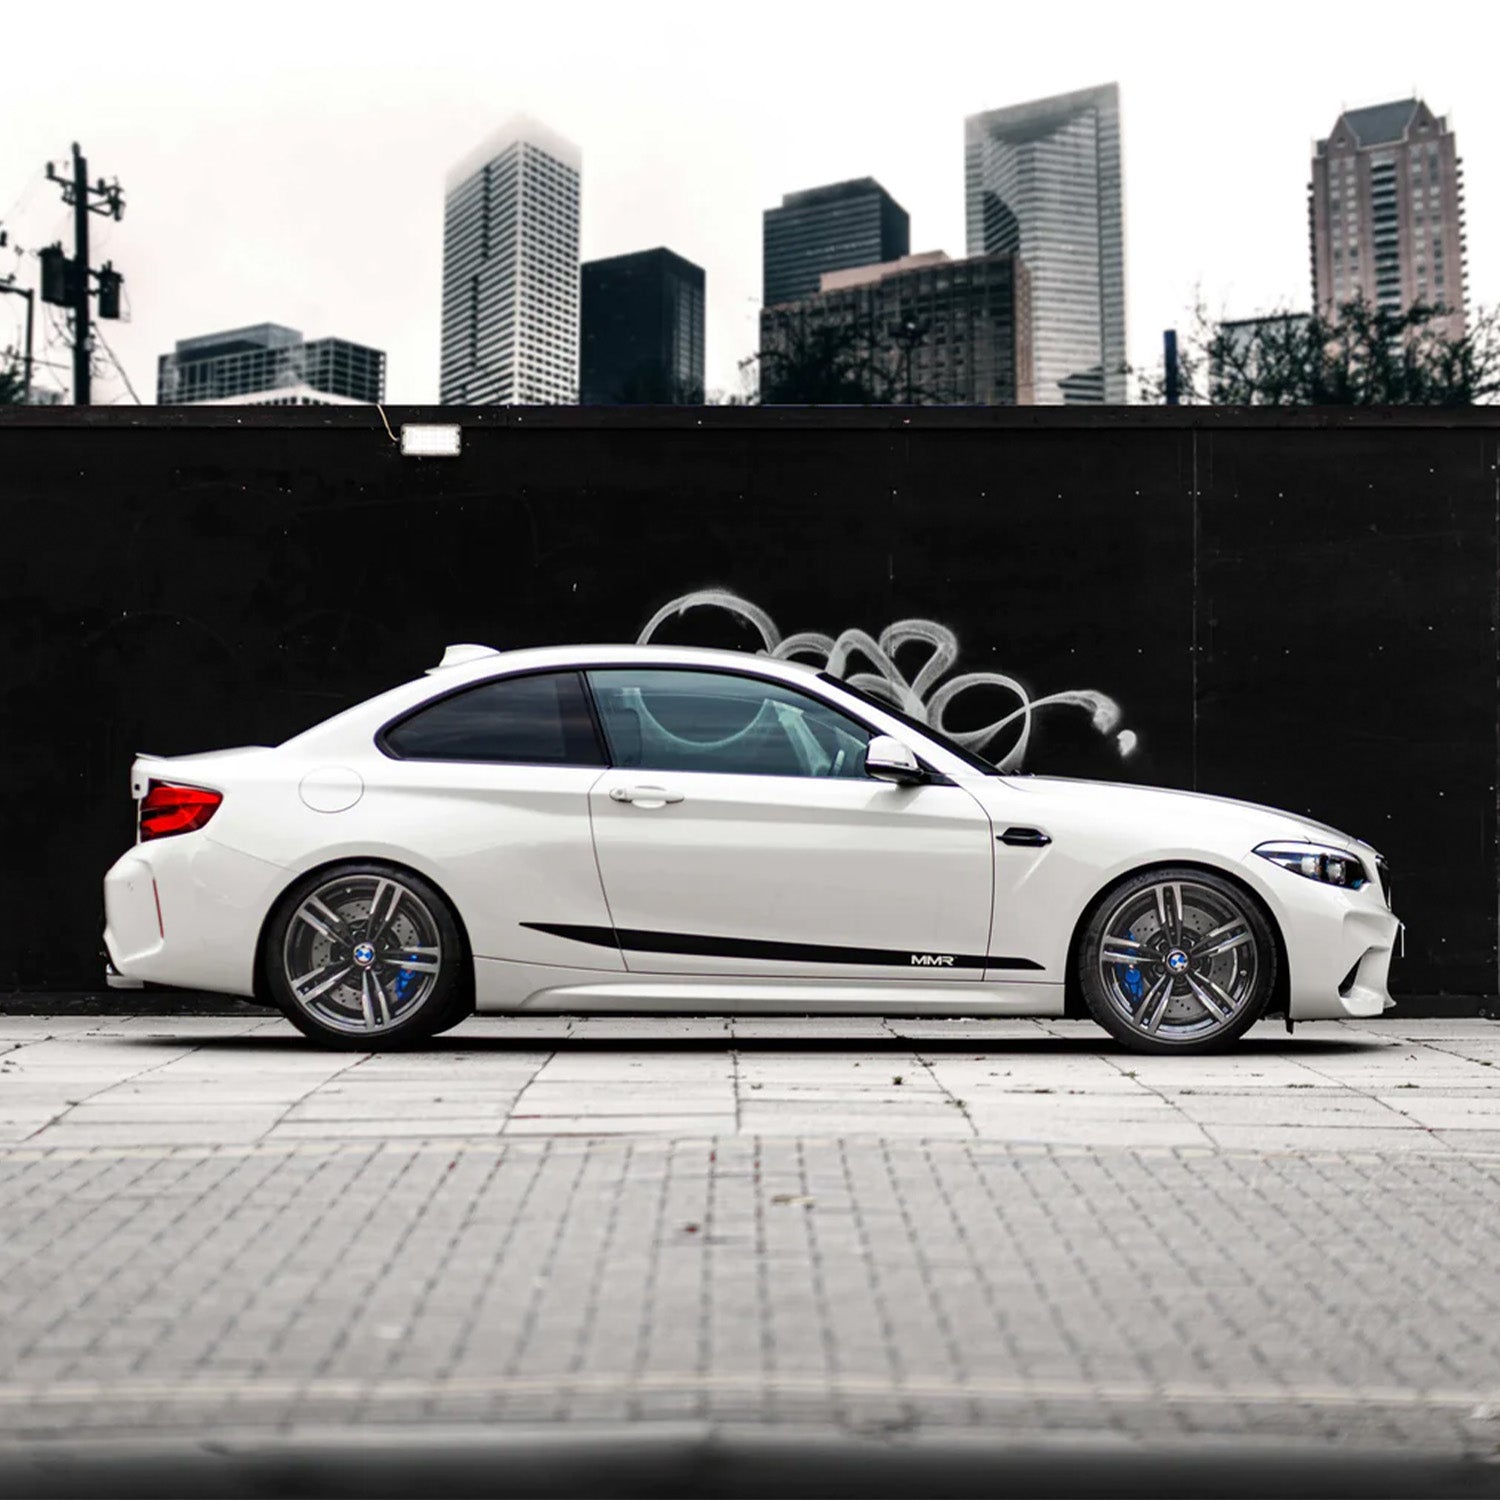 MMR BMW F87 M2 & M2 Competition Lowering Springs